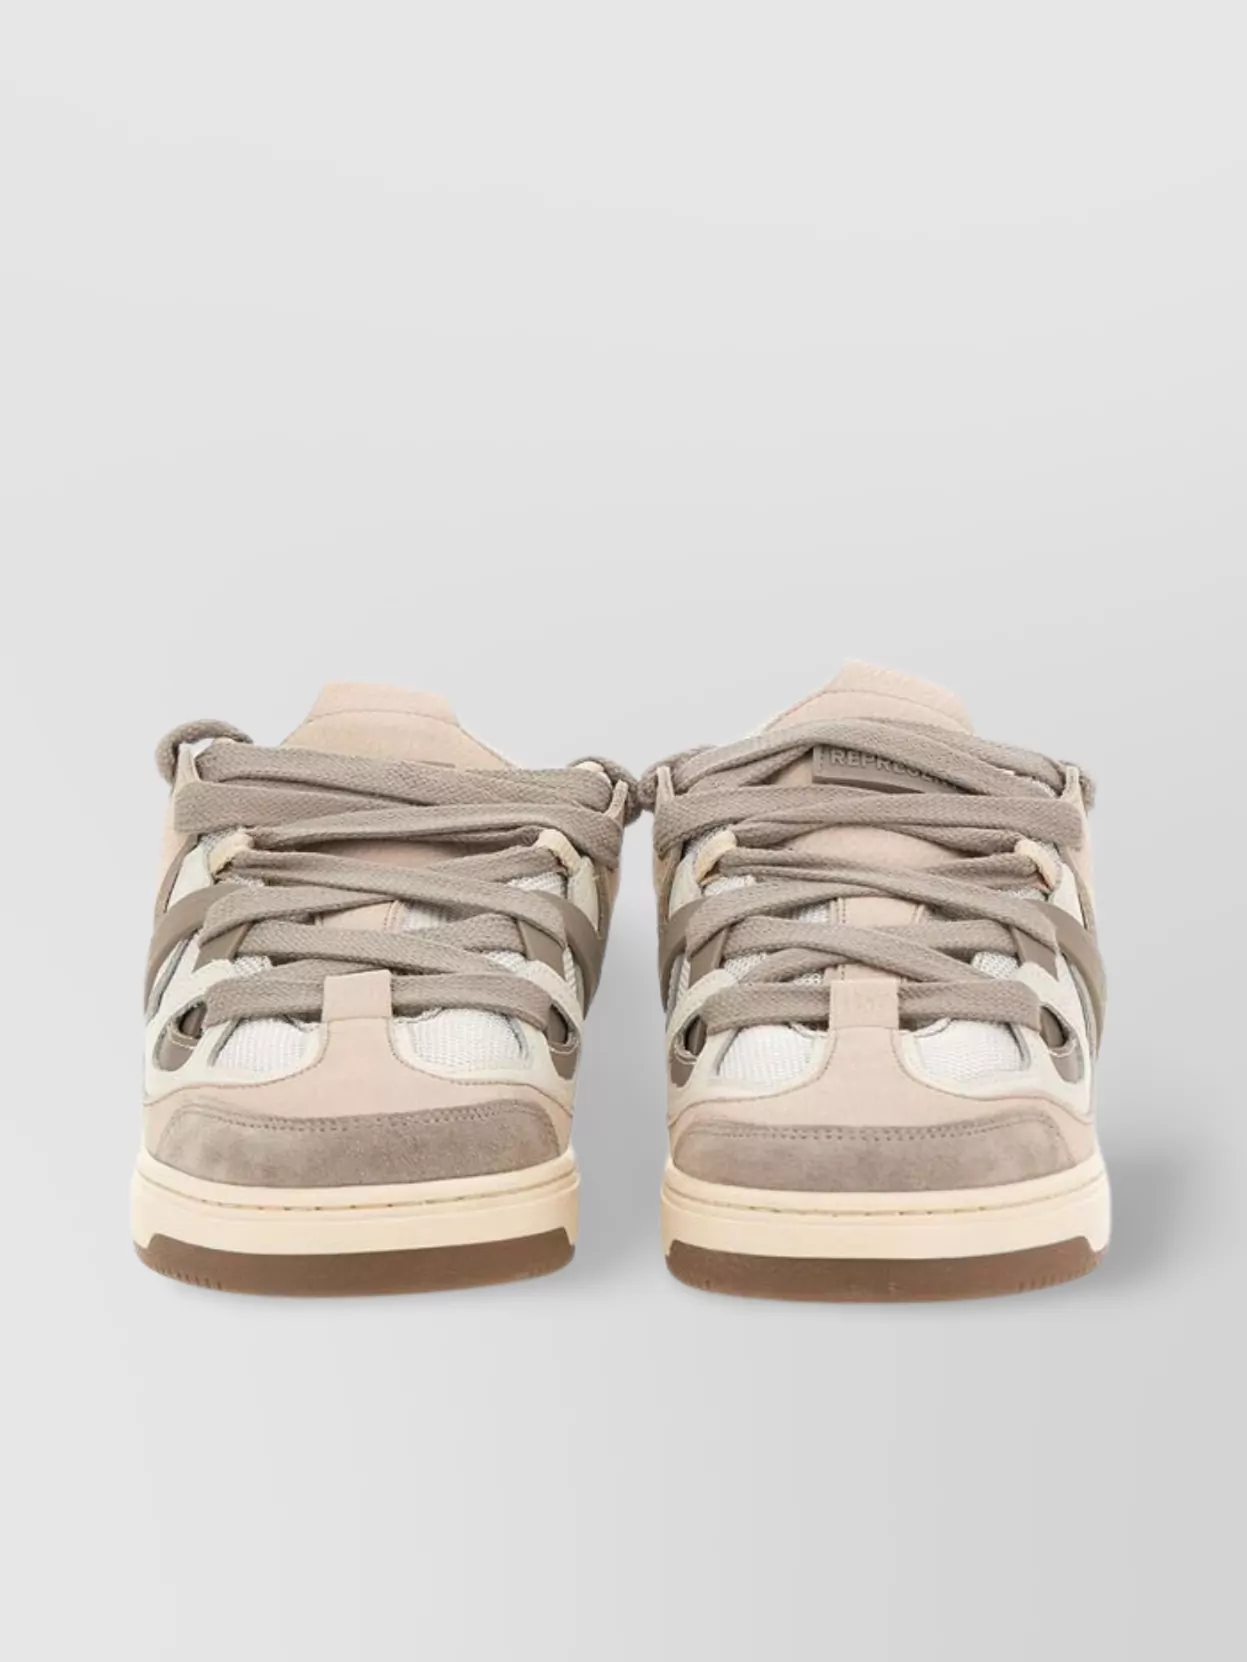 Shop Represent "bully" High Sole Sneakers